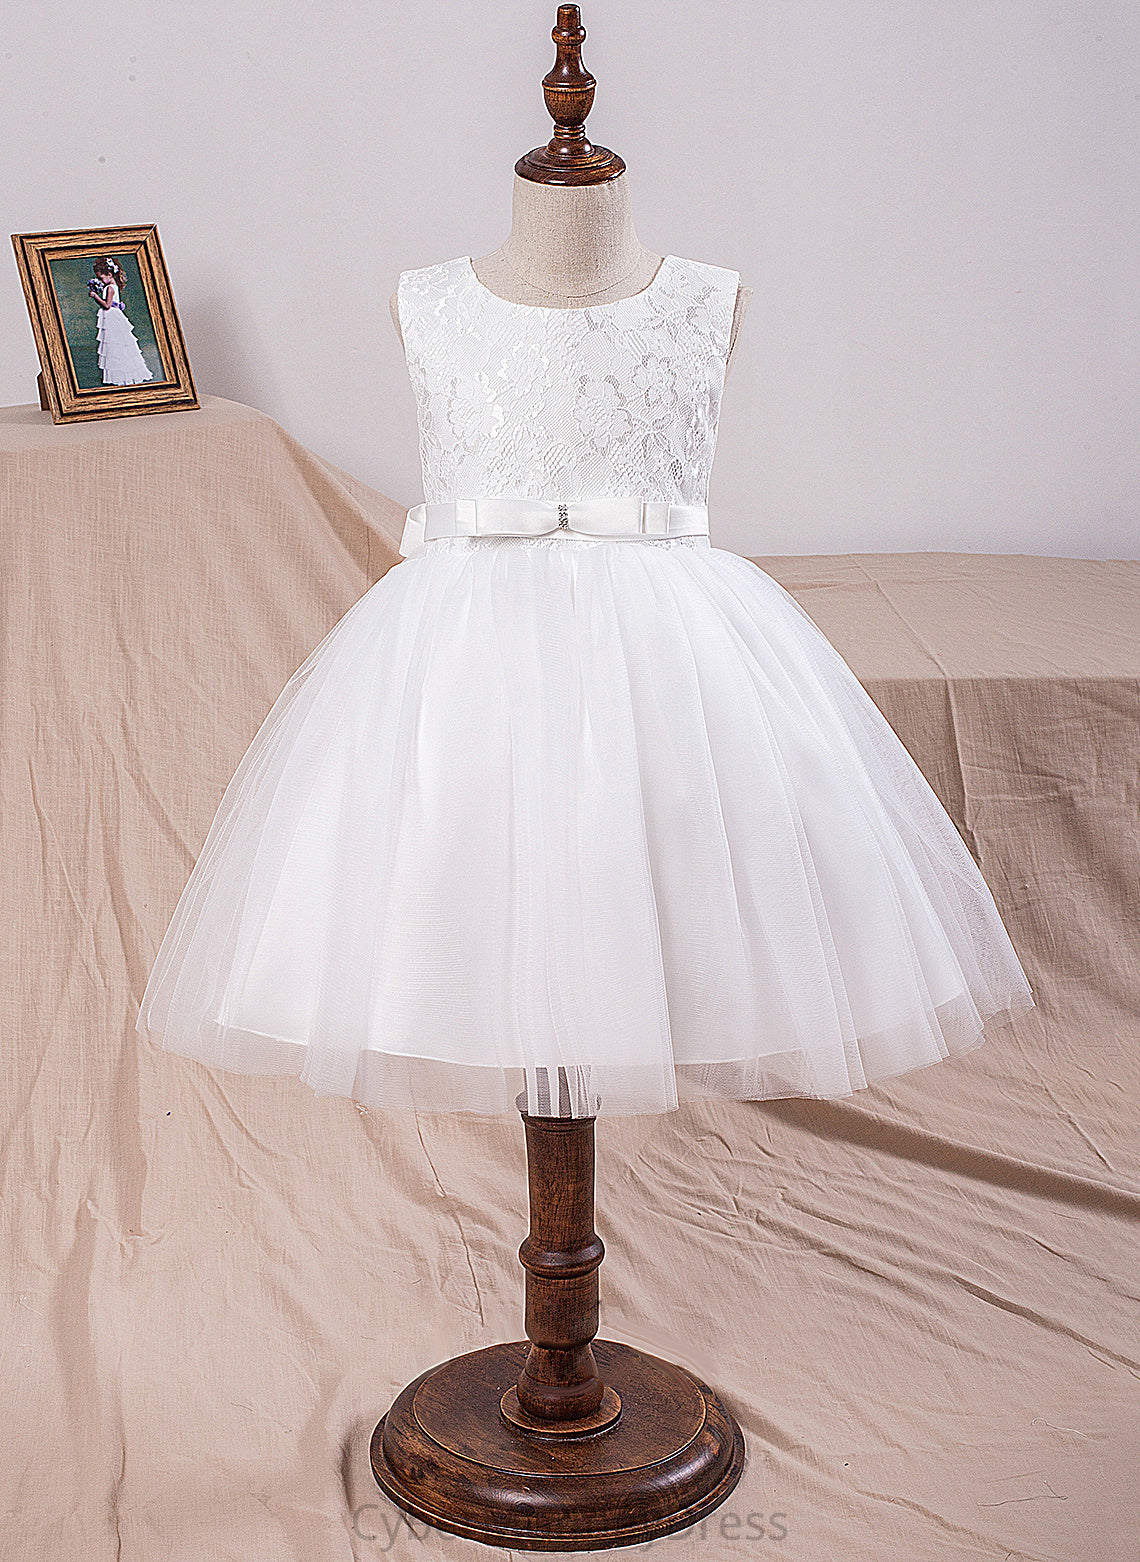 Emmy Tulle/Lace Ball-Gown/Princess Dress Knee-length Neck Sleeveless Scoop With - Girl Flower Girl Dresses Bow(s) Flower